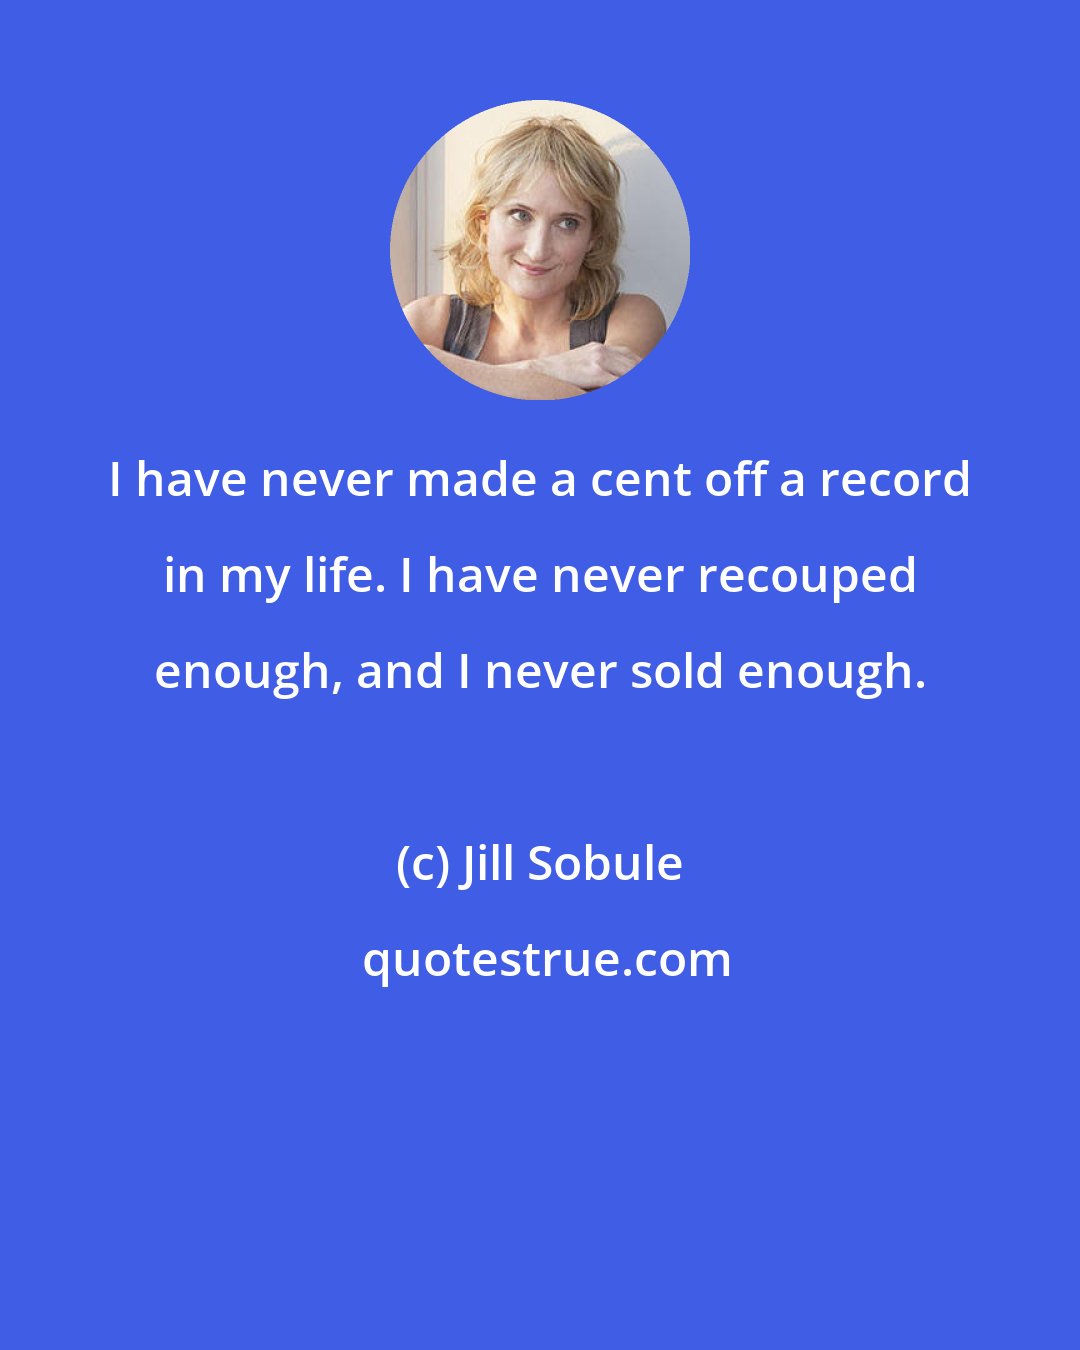 Jill Sobule: I have never made a cent off a record in my life. I have never recouped enough, and I never sold enough.